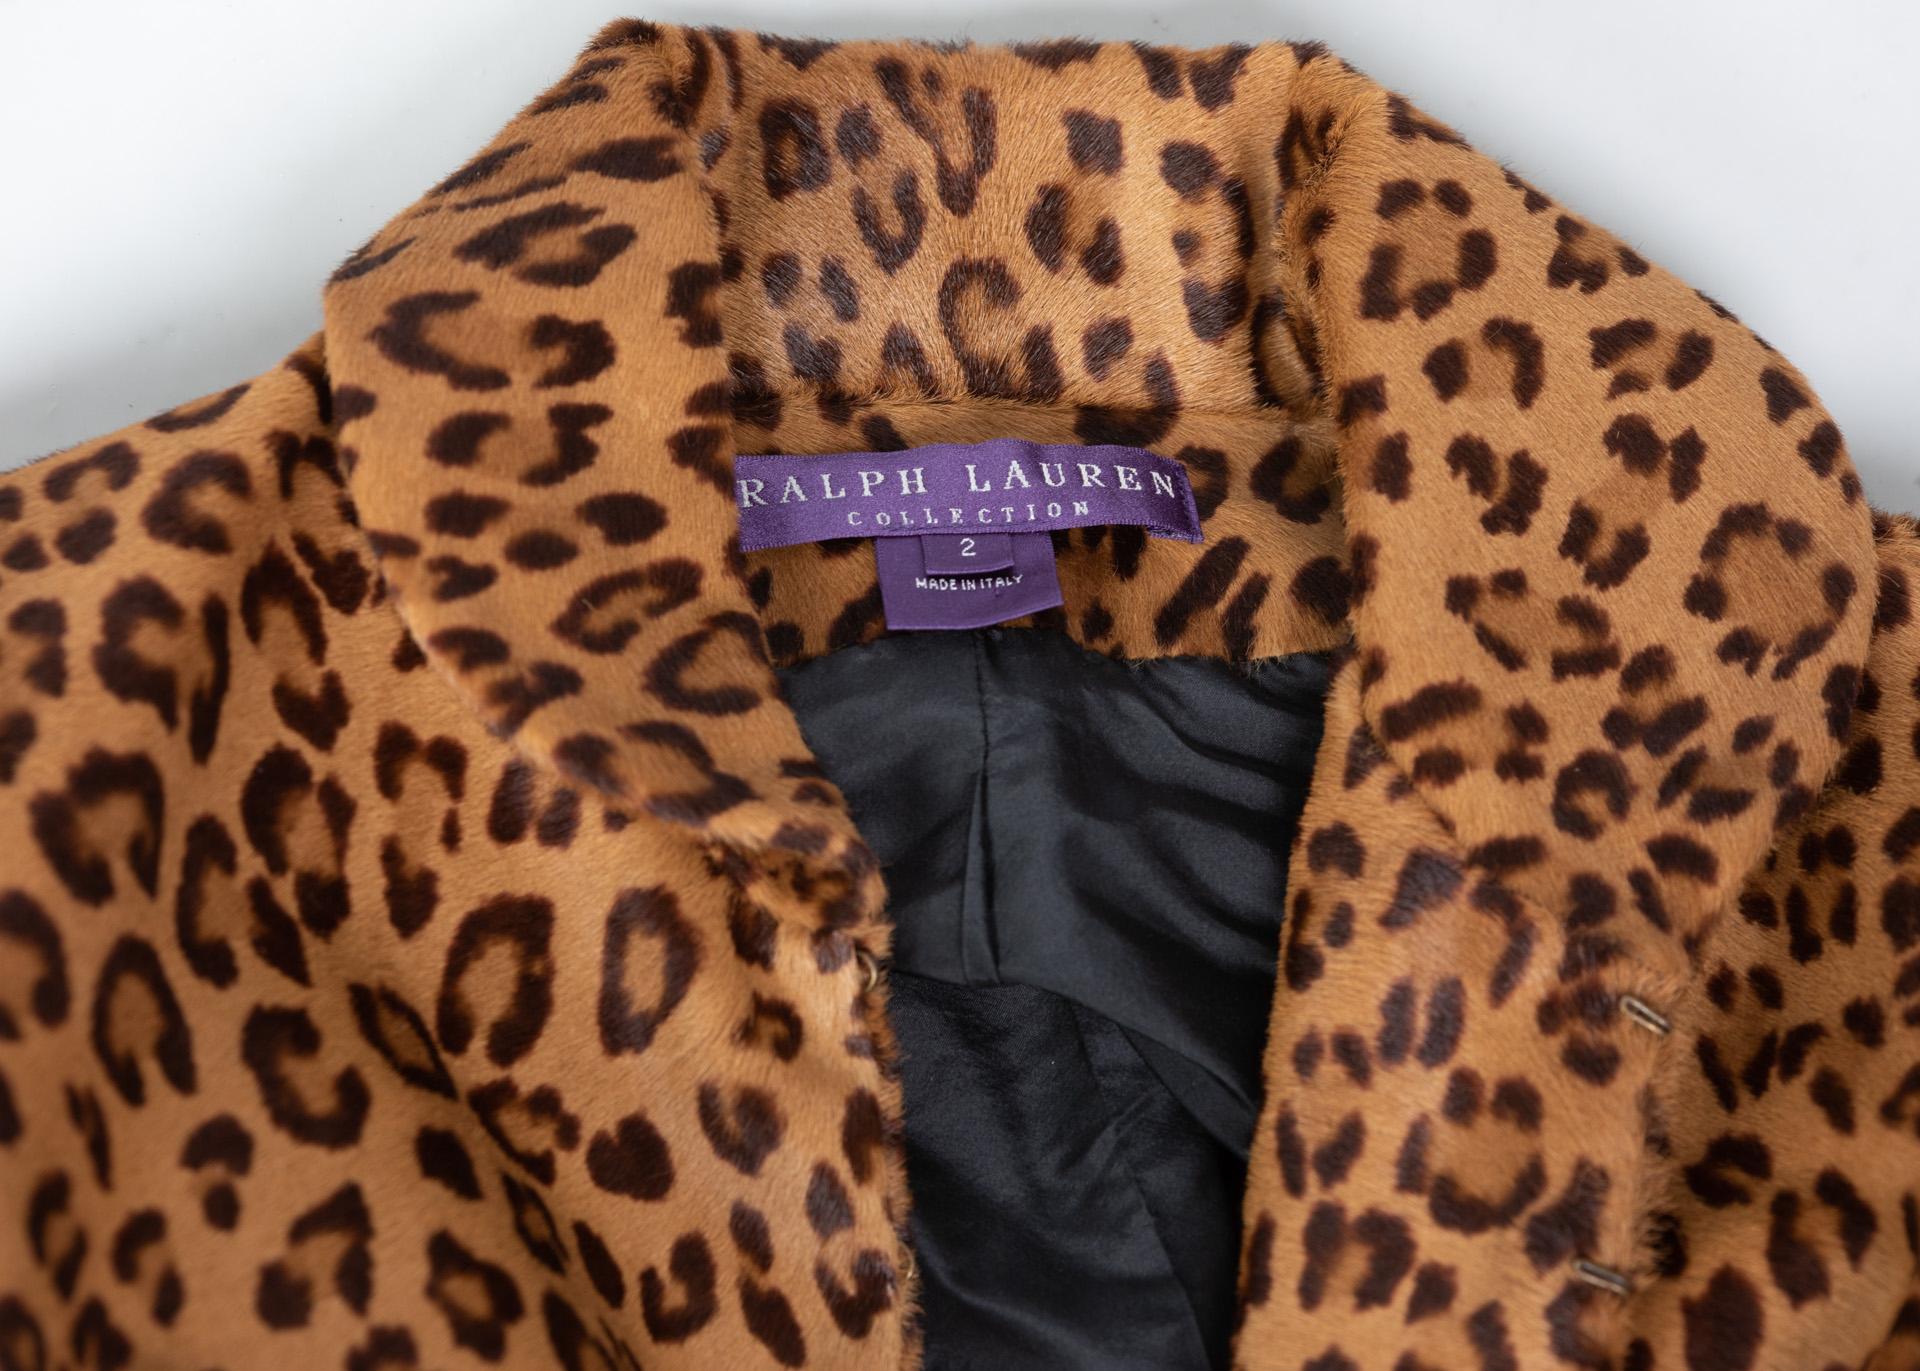 Ralph Lauren Collection Leopard Shearling Cropped Bolero Jacket at ...